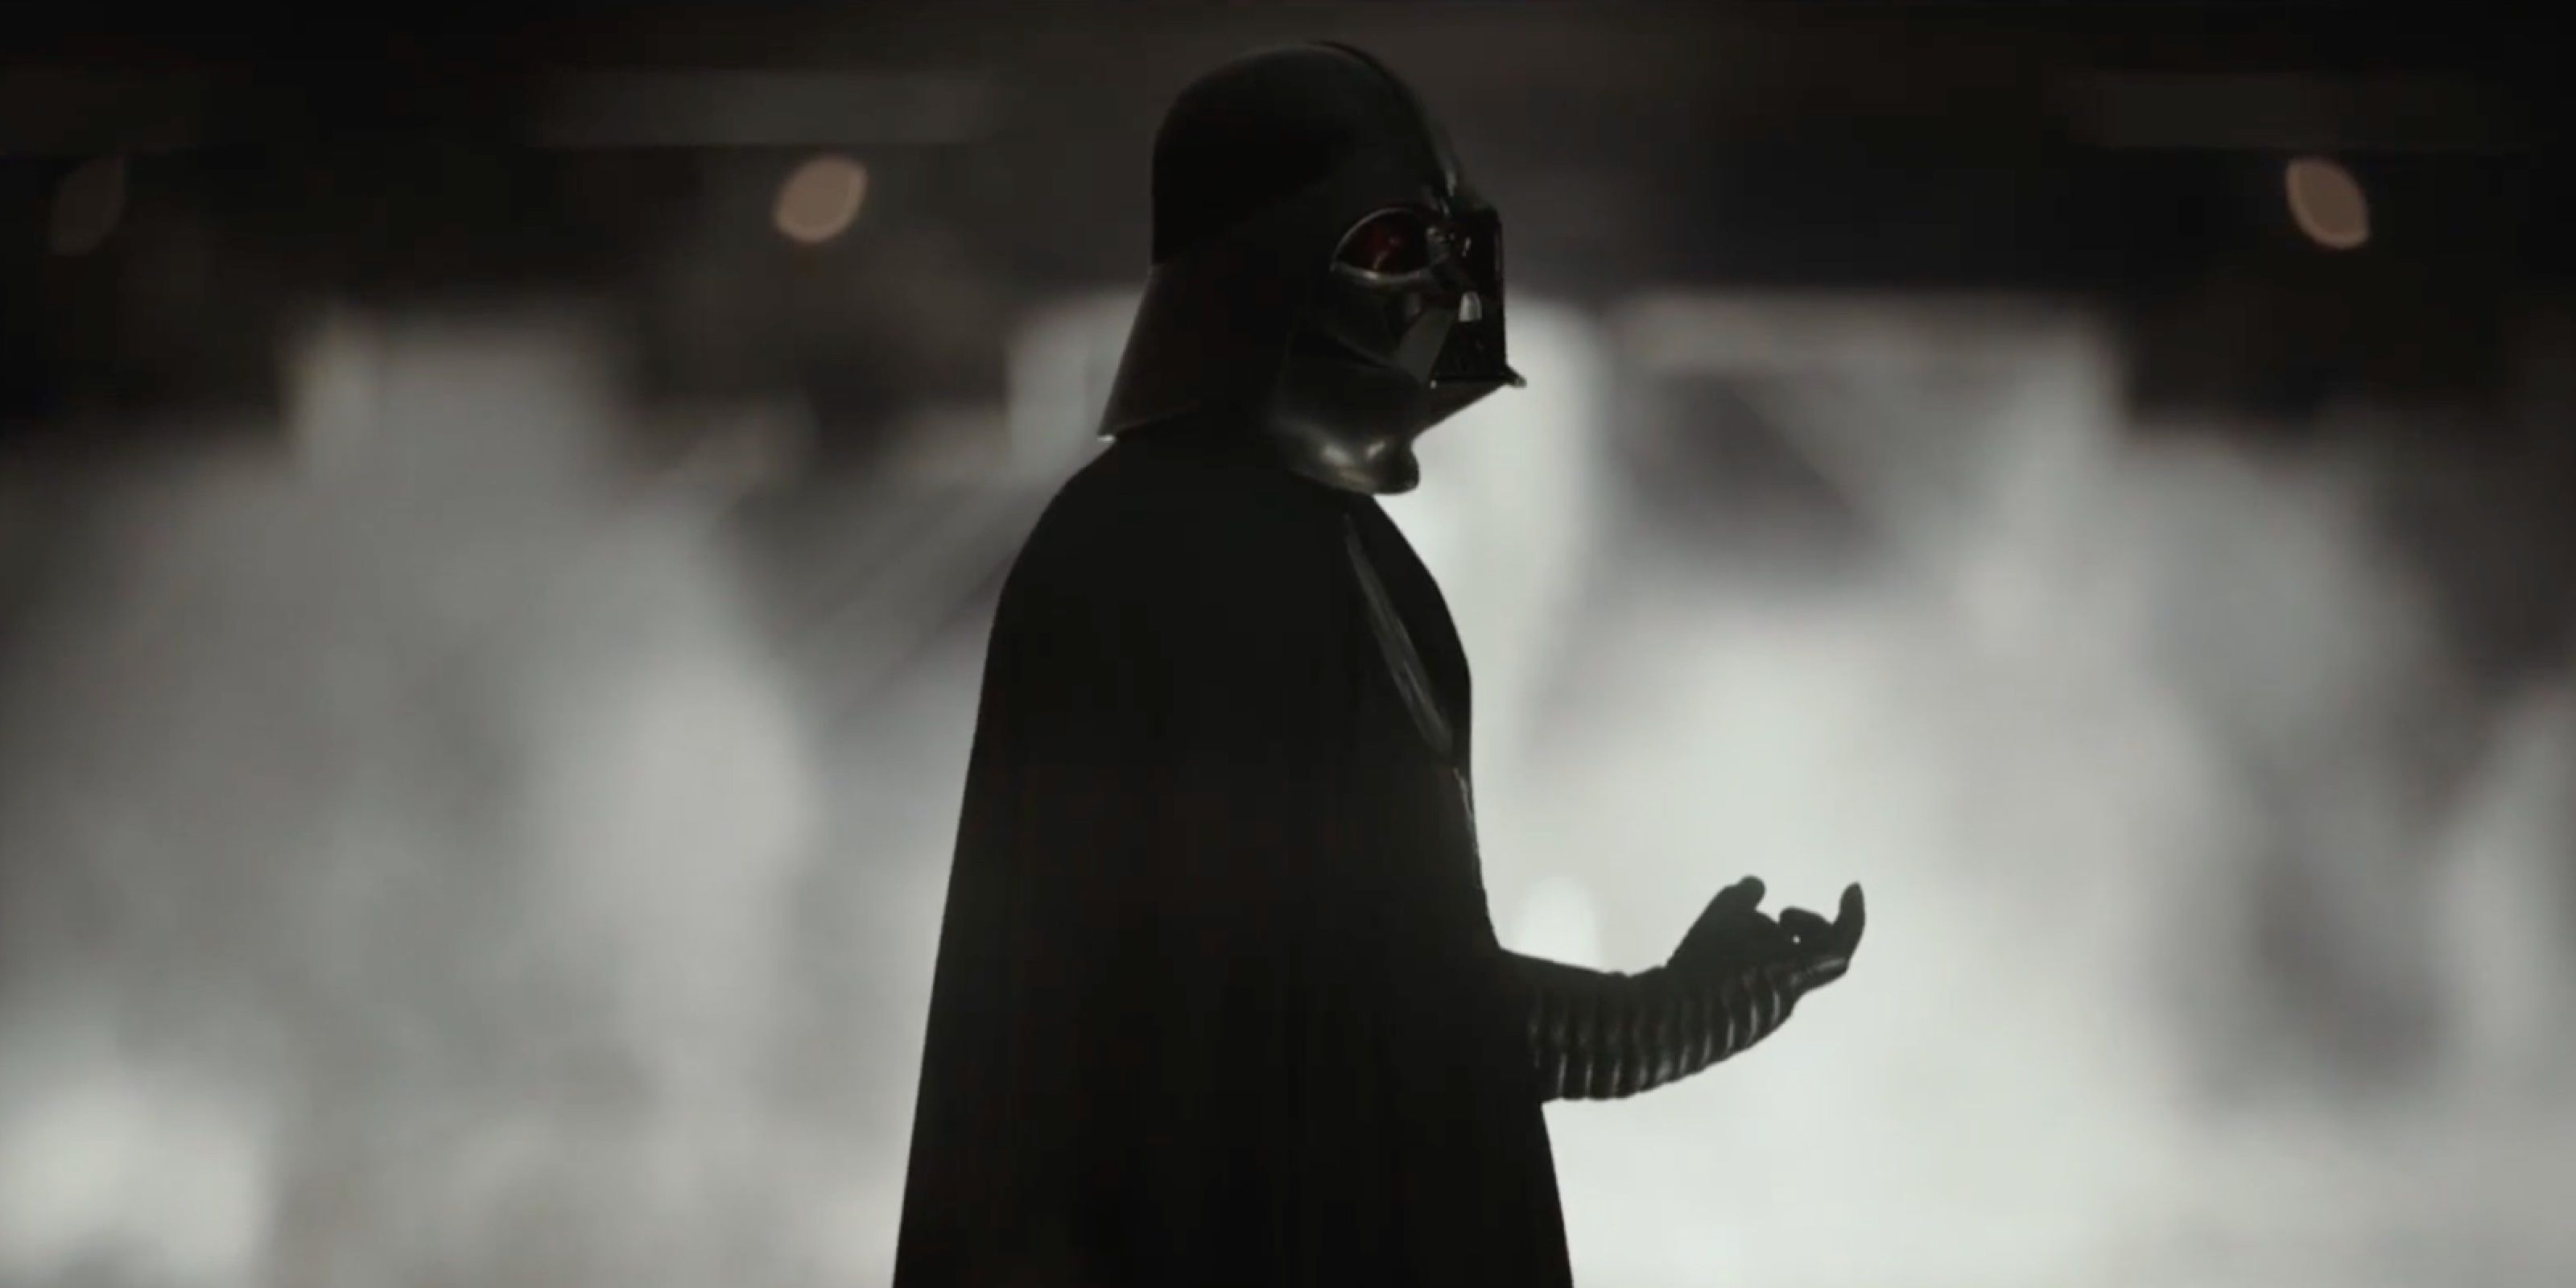 Darth Vader in his chamber in Rogue One